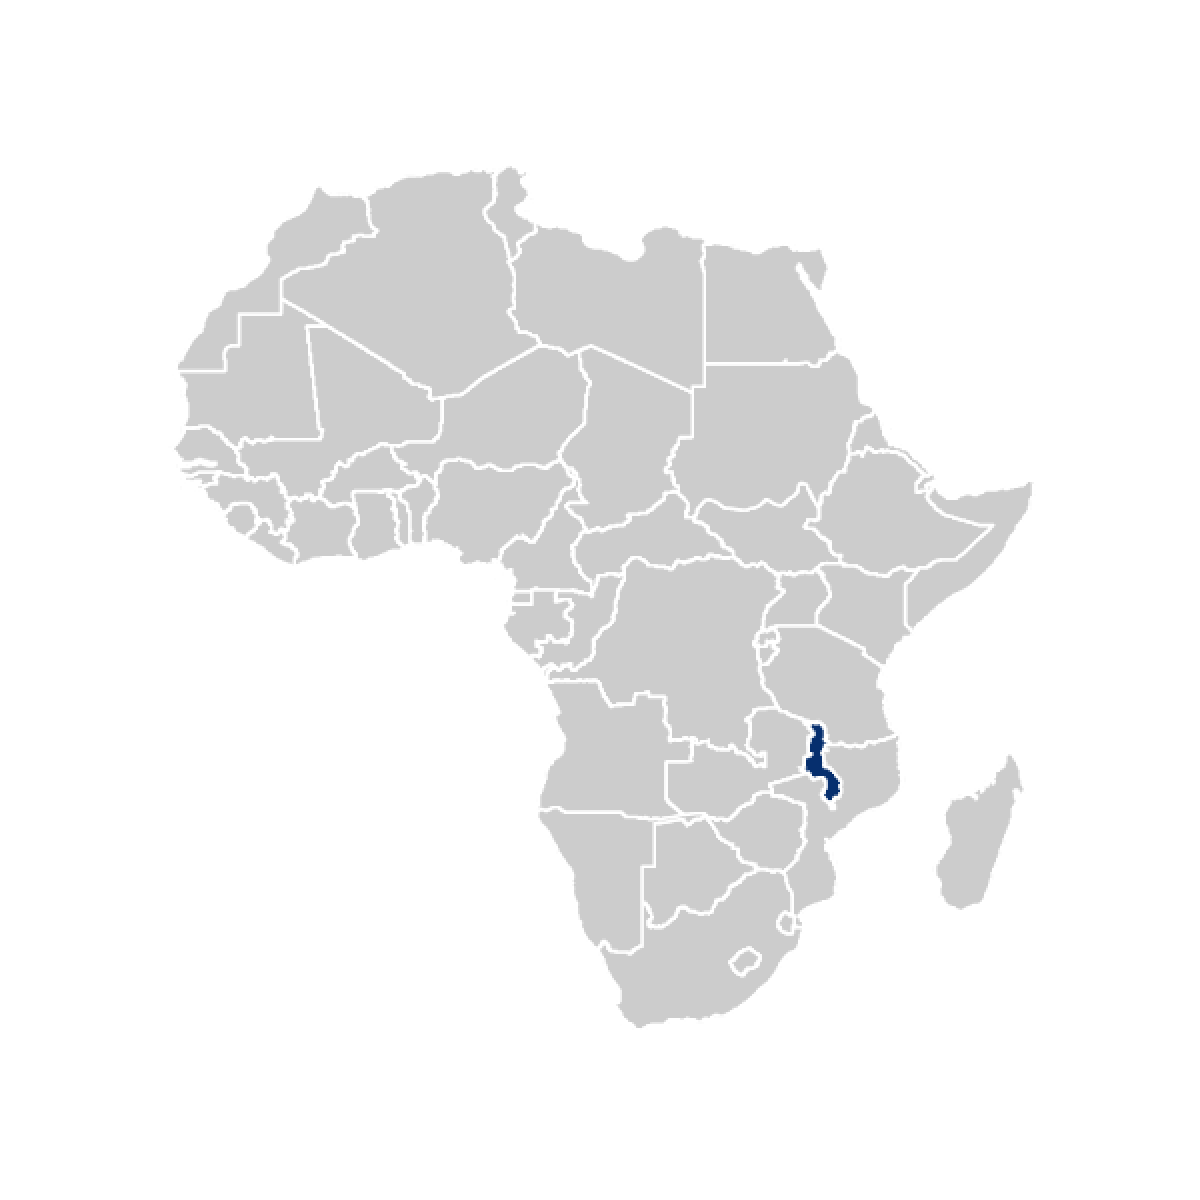 Malawi highlighted in map of Africa